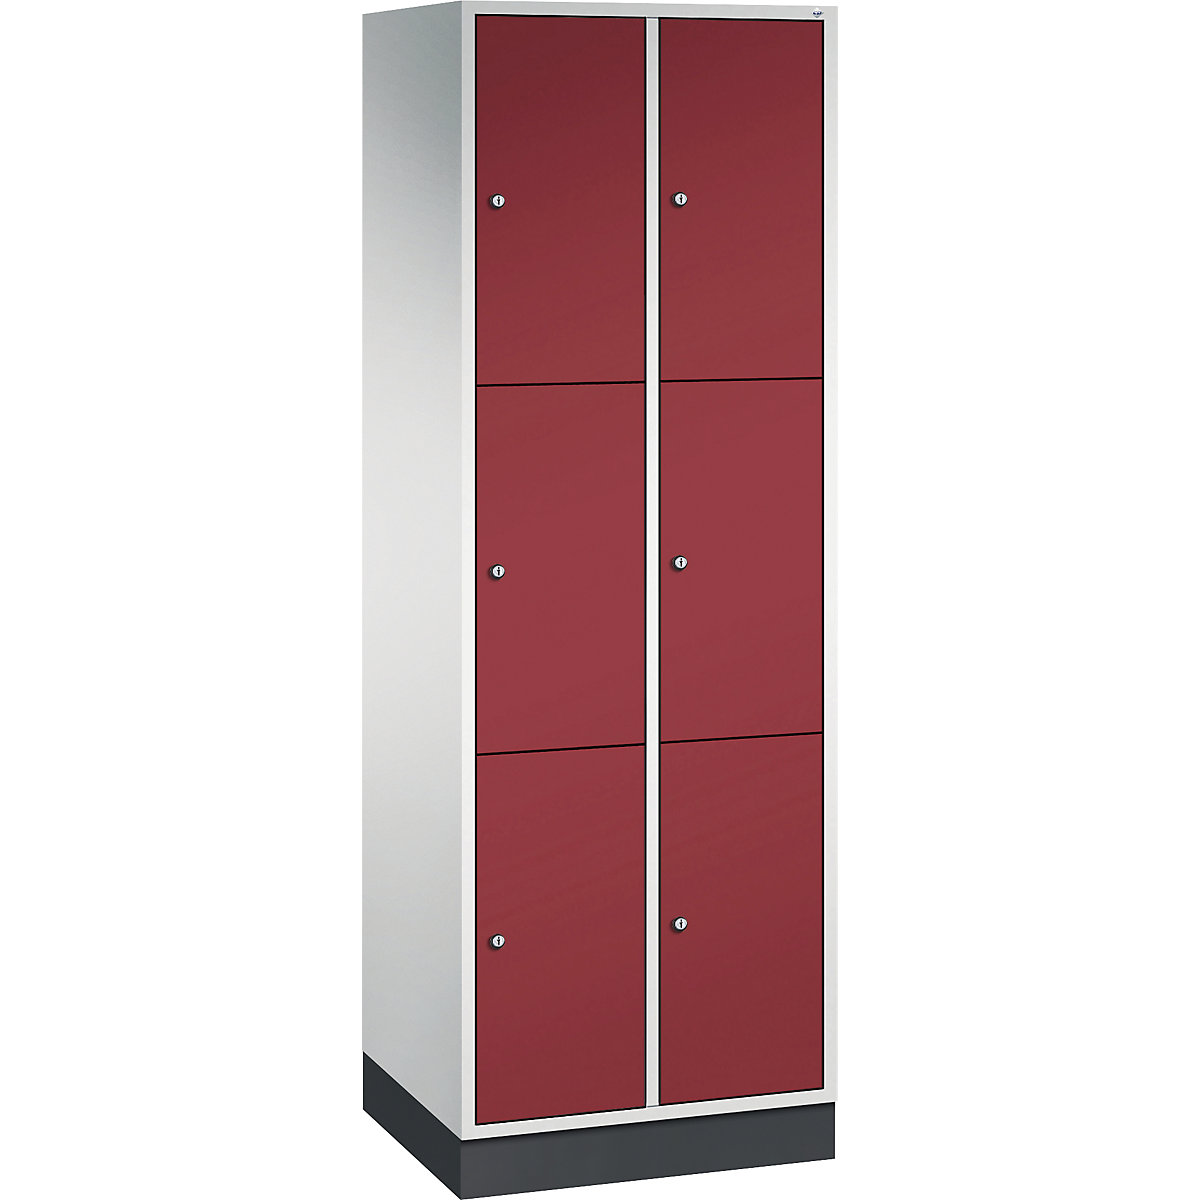 INTRO steel compartment locker, compartment height 580 mm – C+P, WxD 620 x 500 mm, 6 compartments, light grey body, ruby red doors